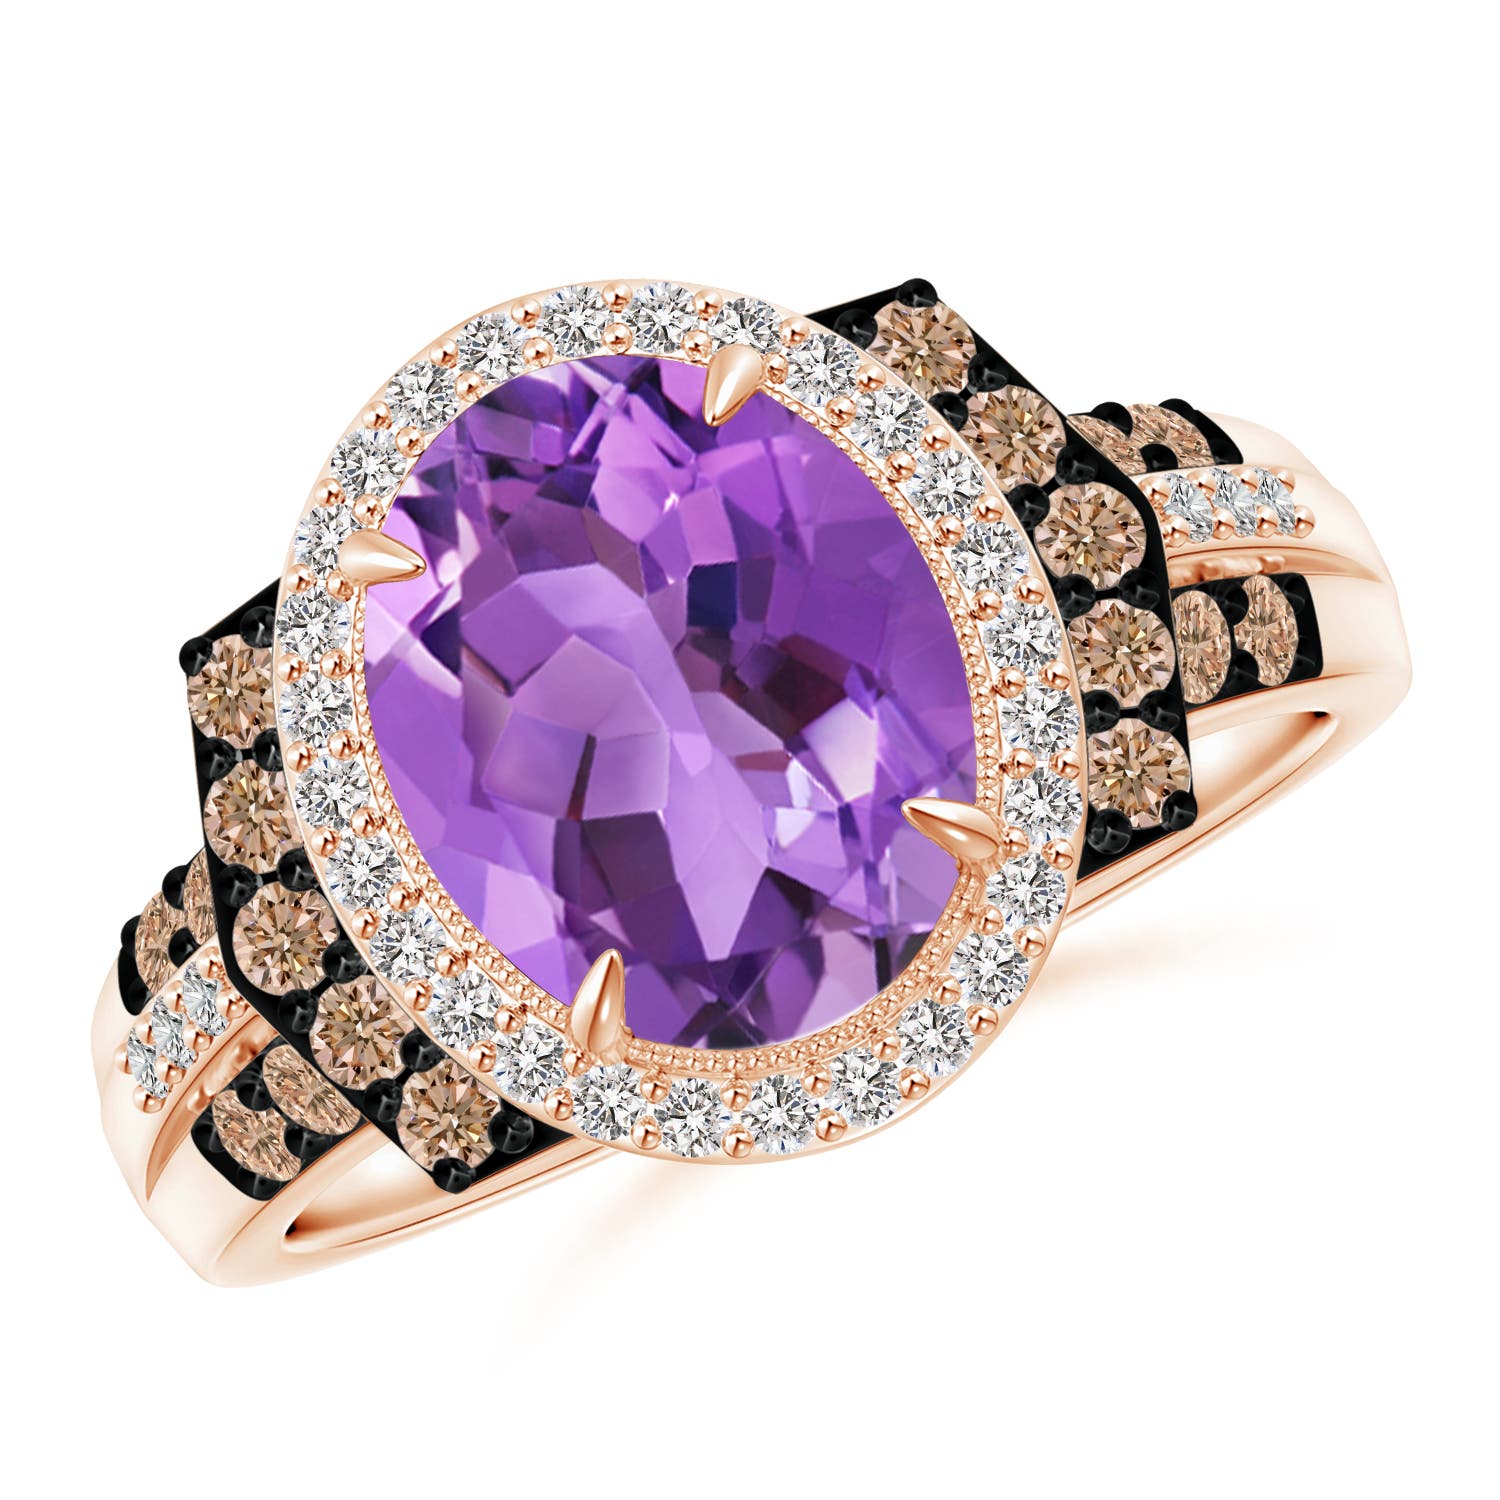 AA - Amethyst / 2.81 CT / 14 KT Rose Gold